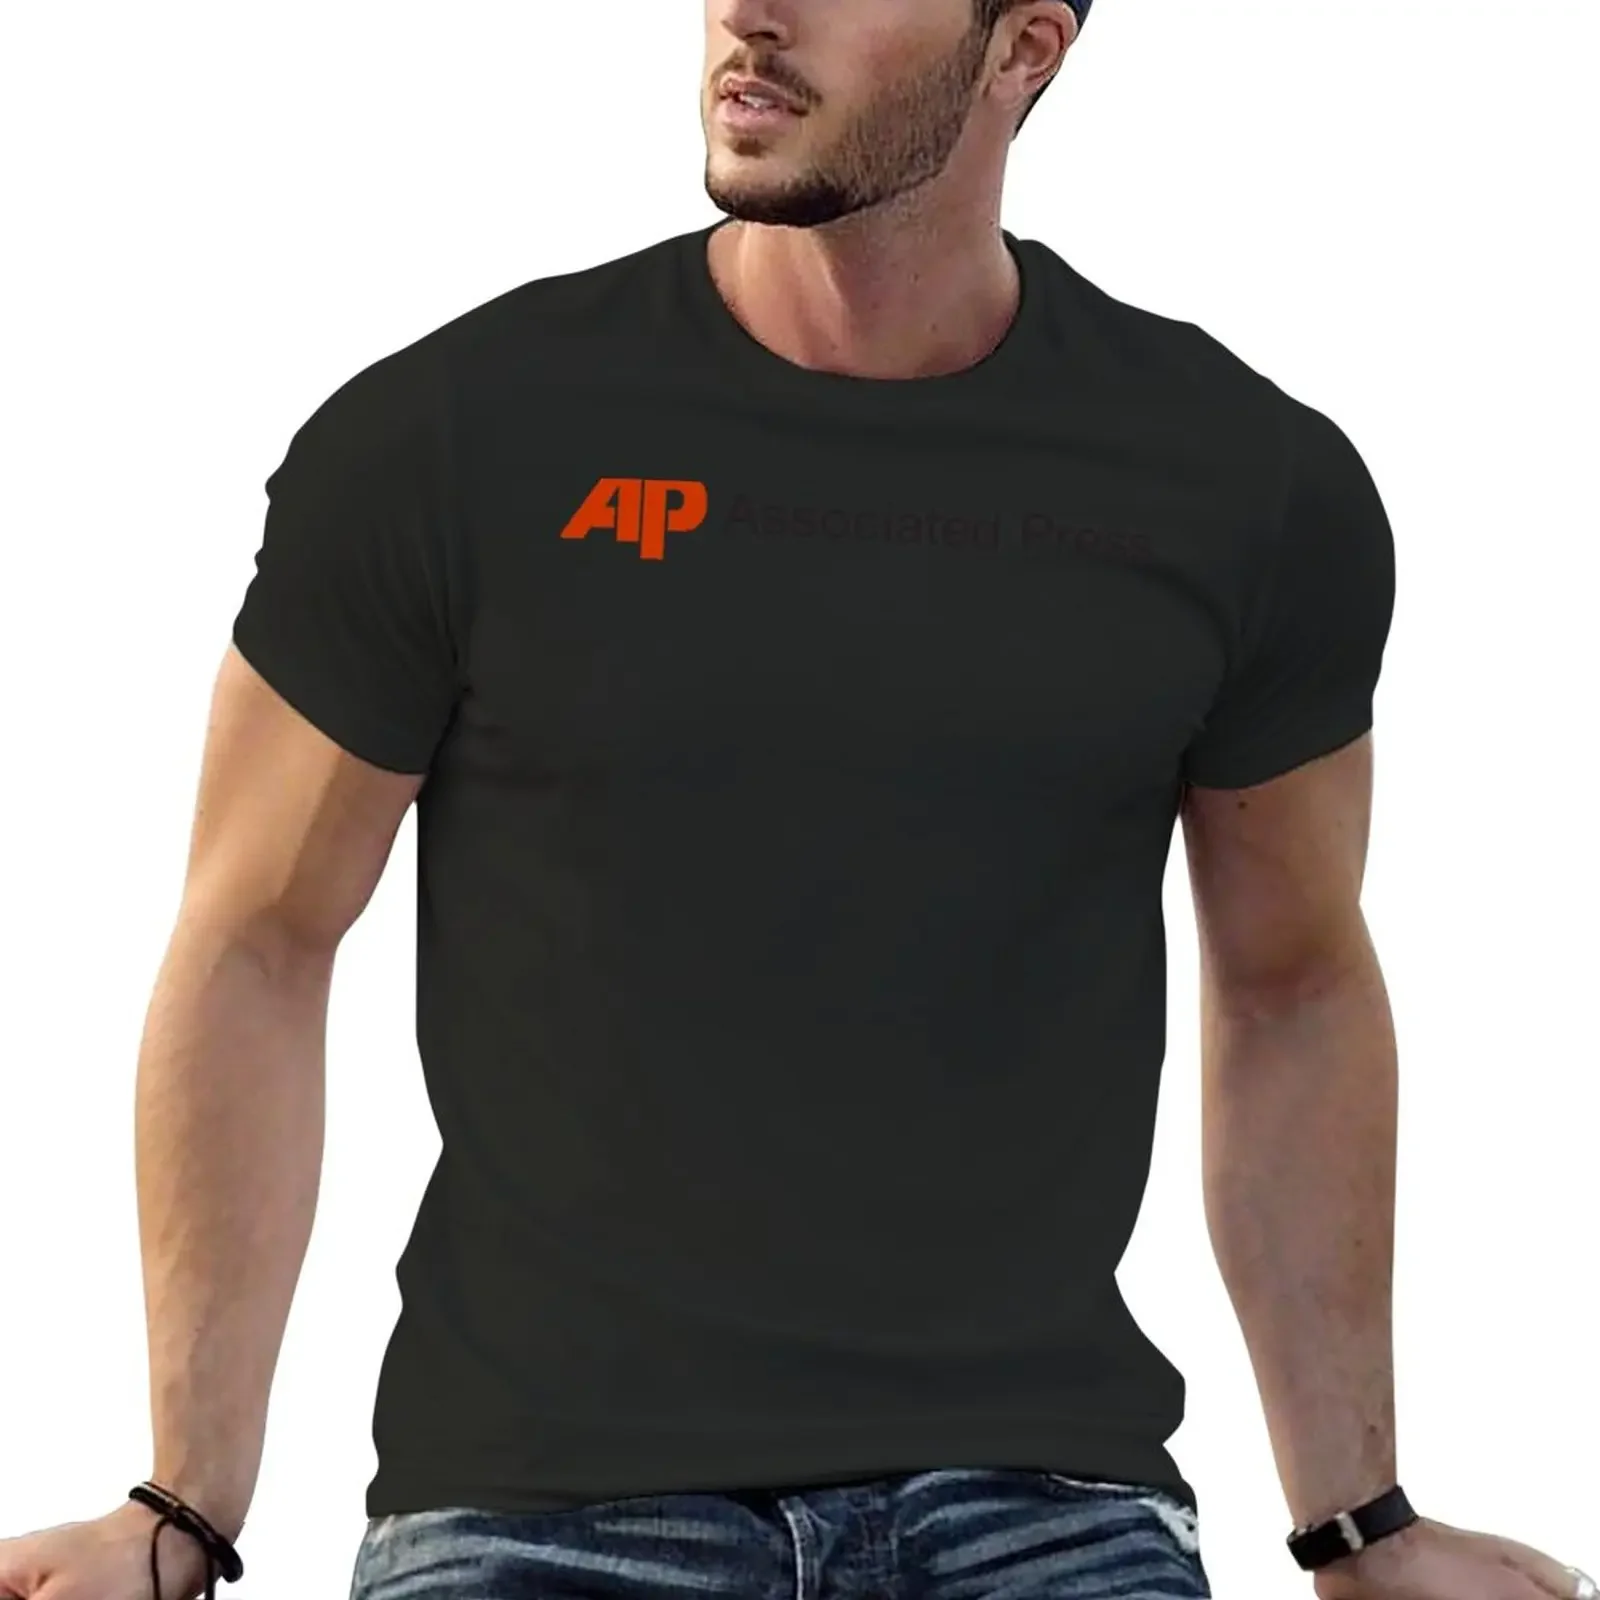 

Associated Press Essential T-Shirt aesthetic clothes animal prinfor boys mens workout shirts